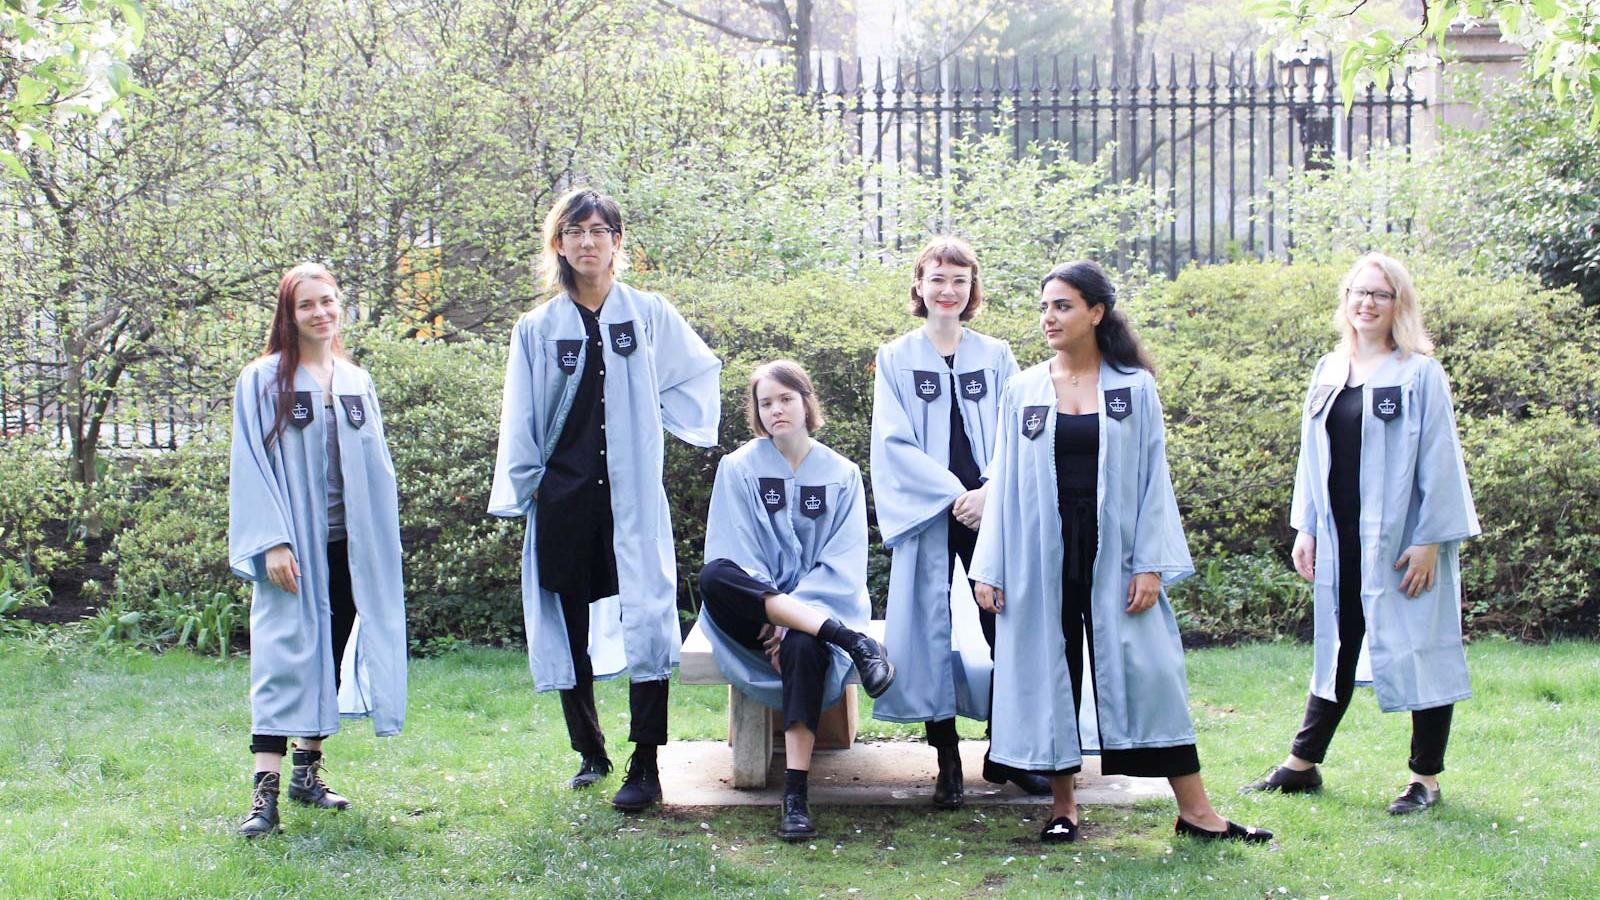 6 young women in light blue graduation robes on Barnard's green campus